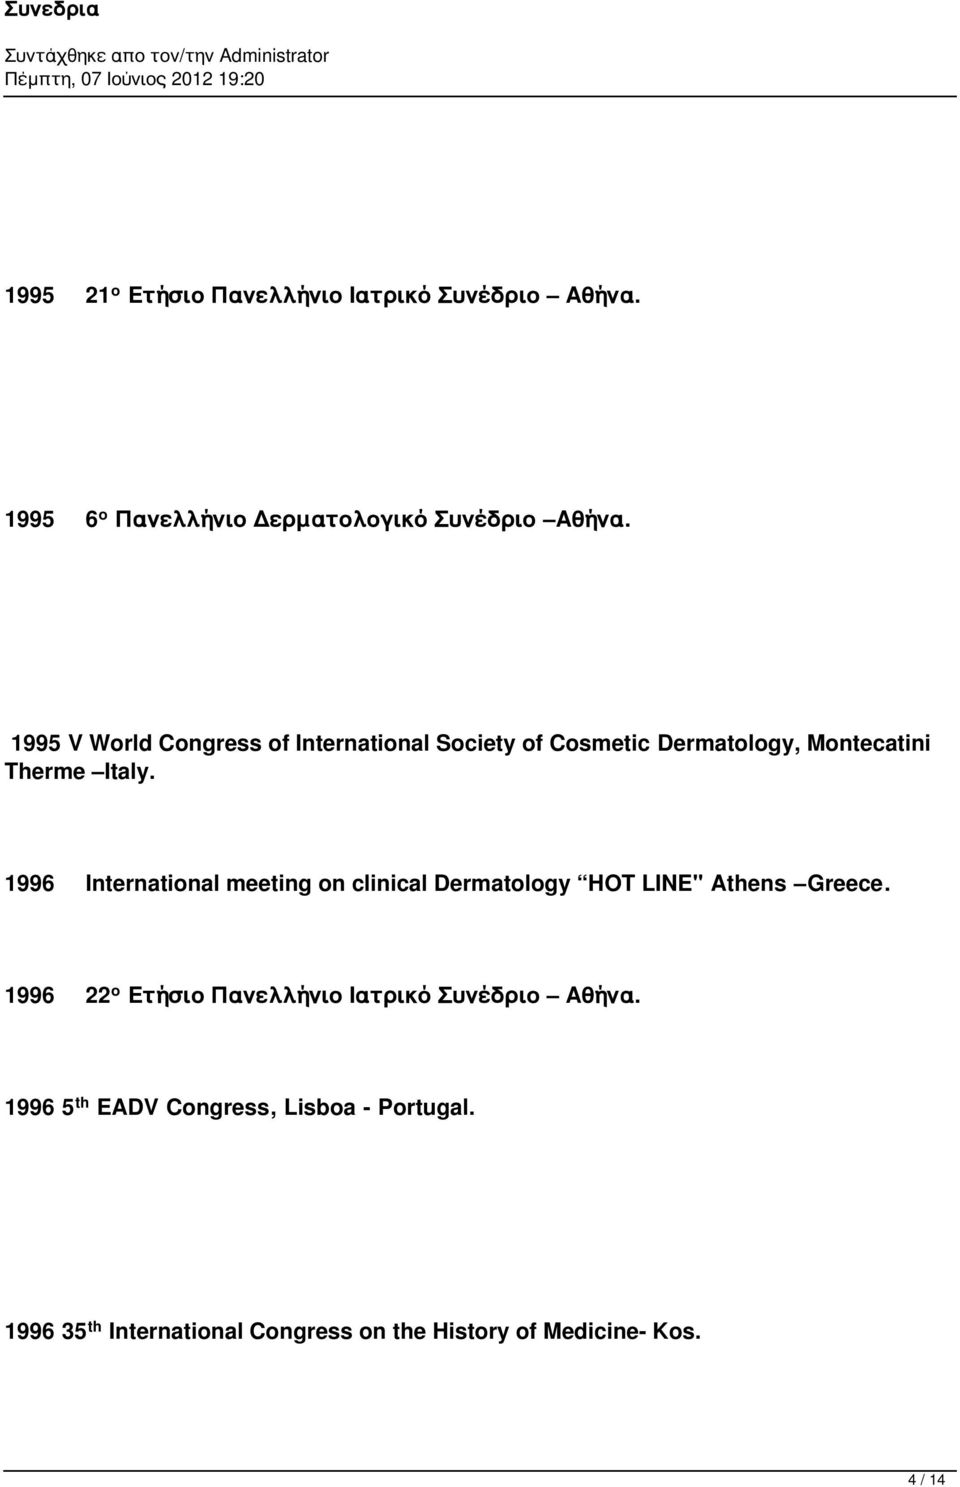 1996 International meeting on clinical Dermatology HOT LINE" Athens Greece.